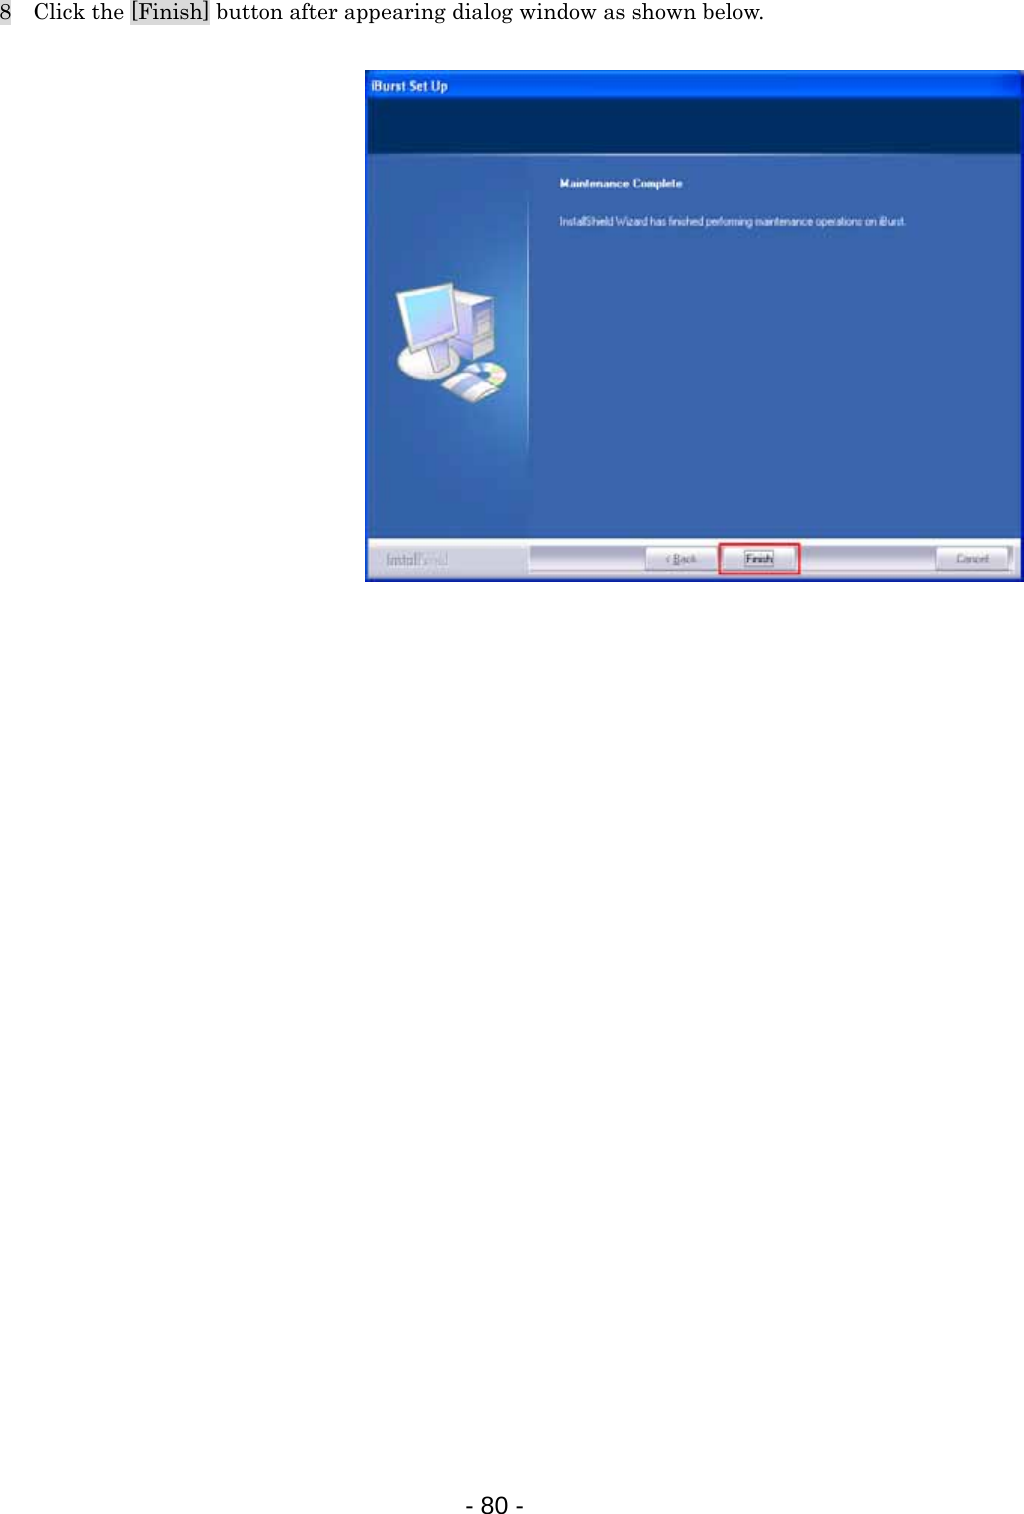 8    Click the [Finish] button after appearing dialog window as shown below.                                       - 80 -  